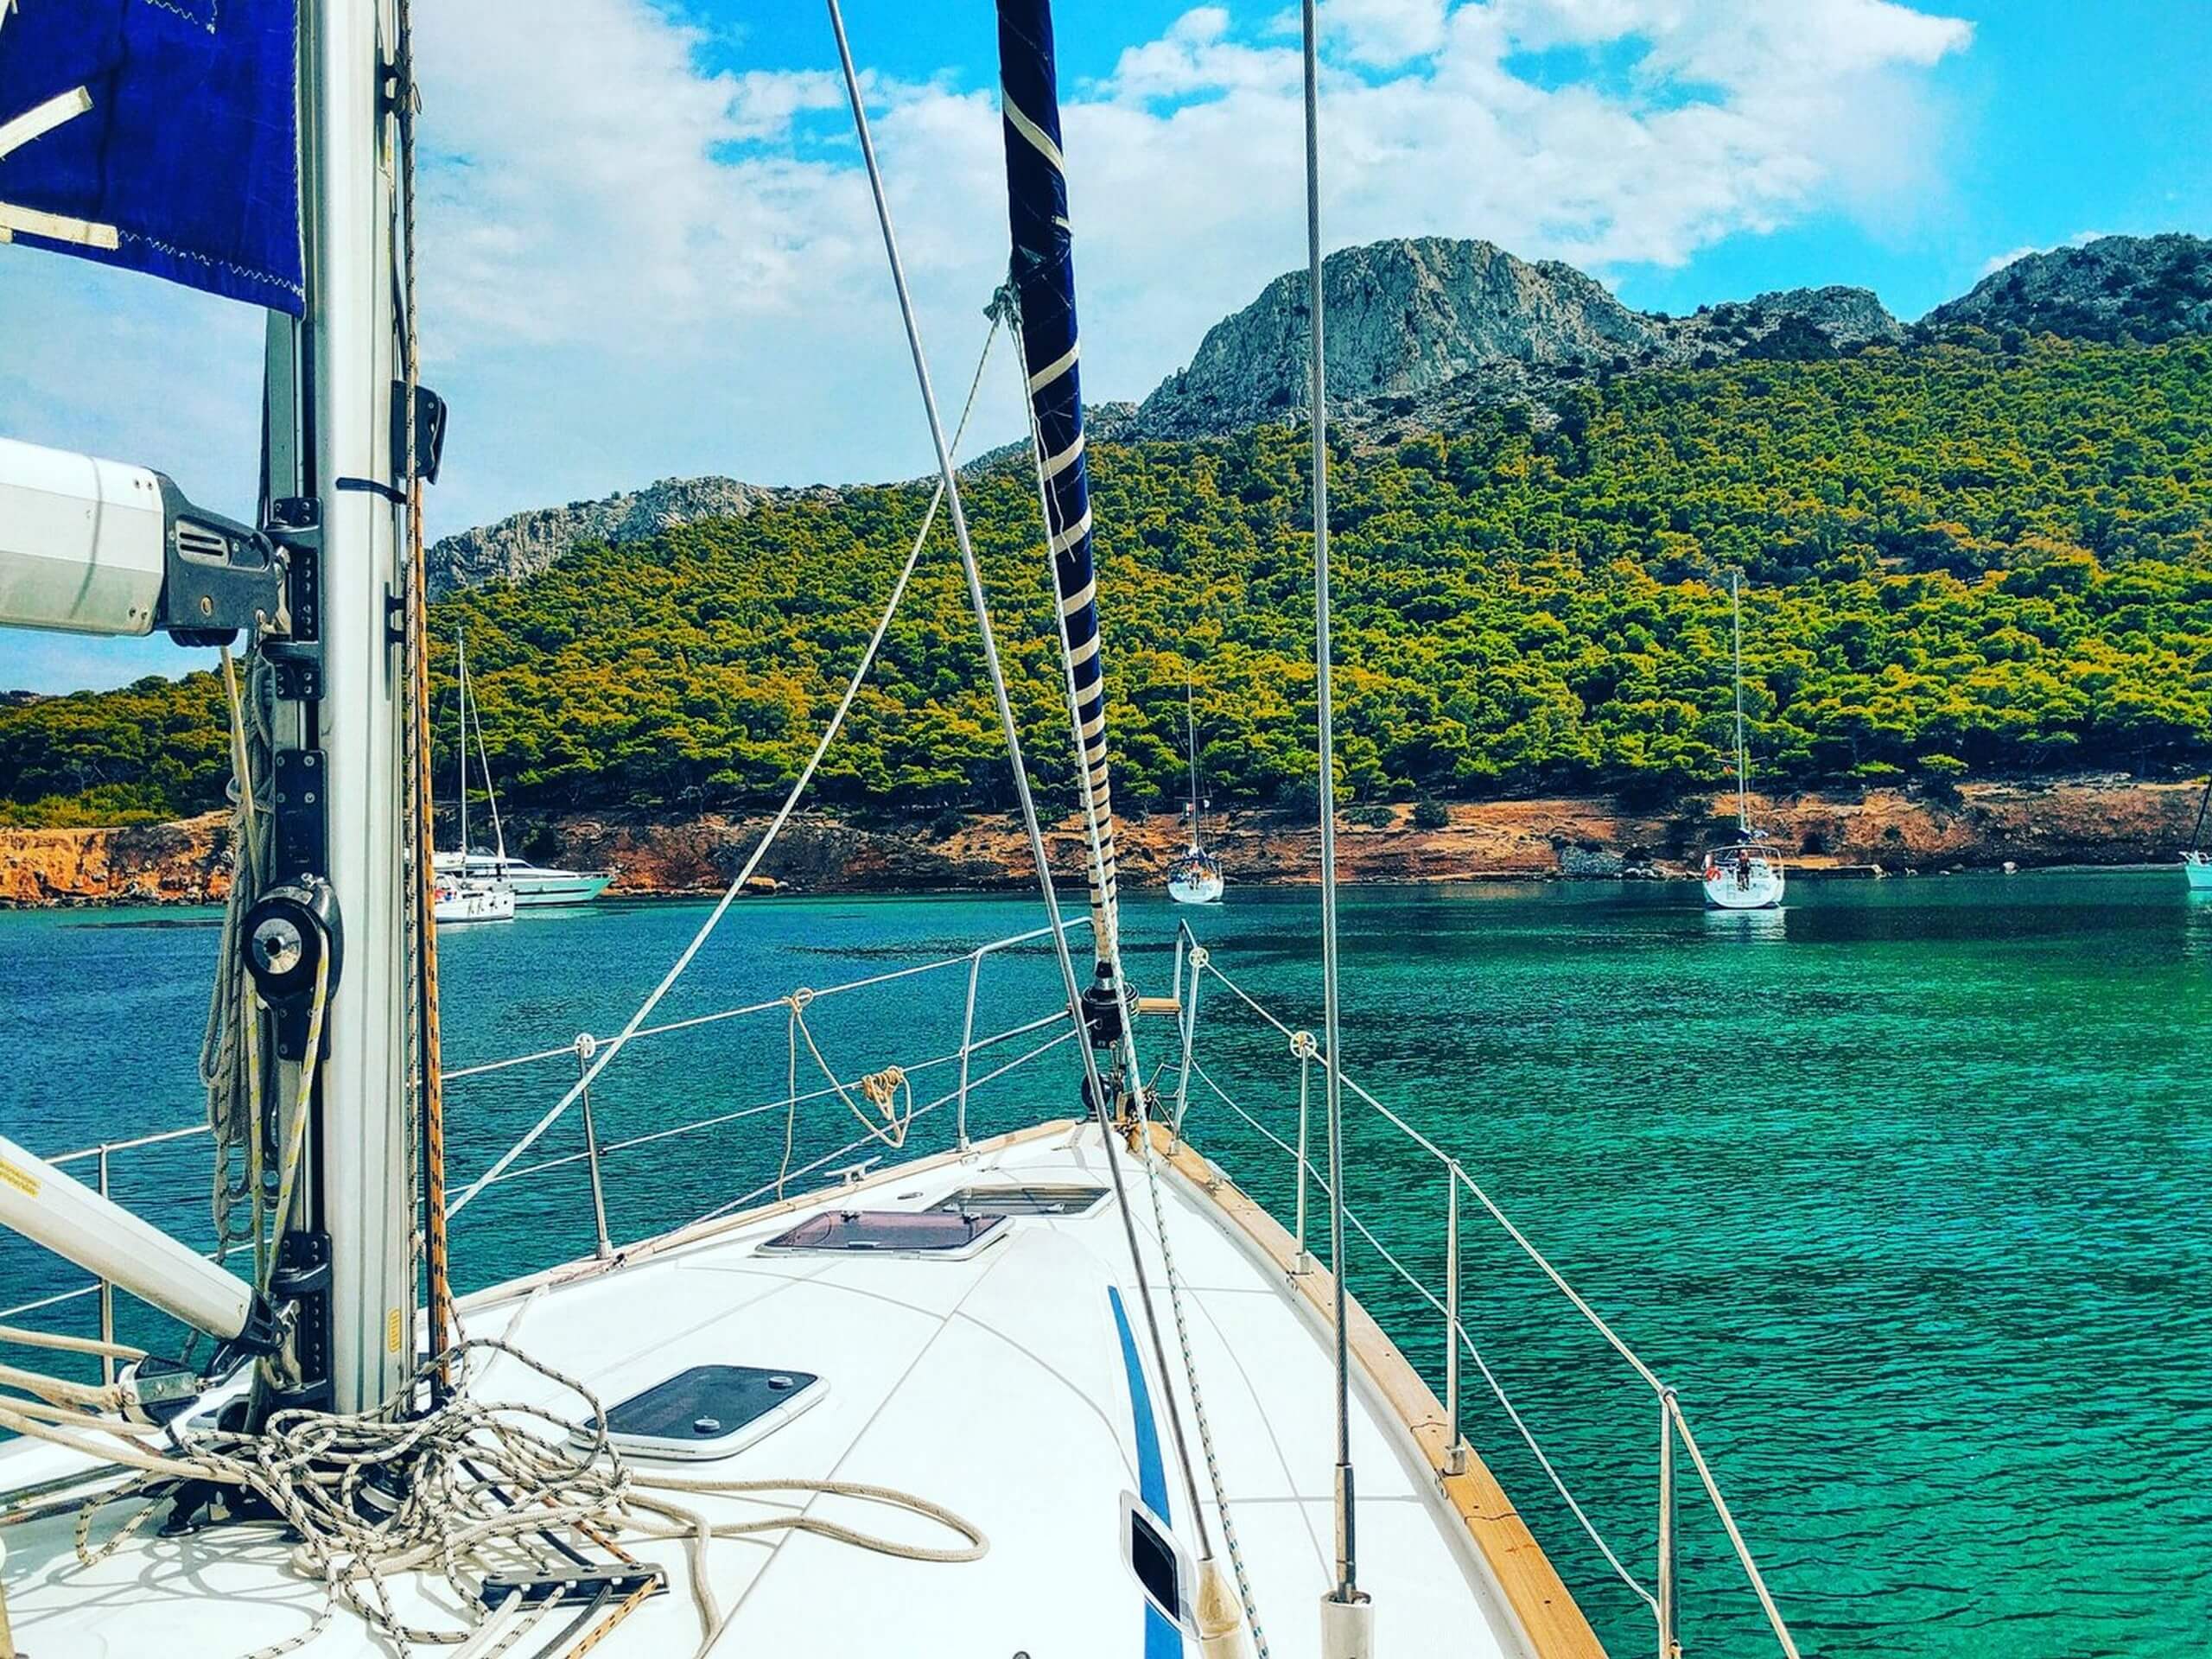 View from the sailboat near the shores of one of the small island of Saronics